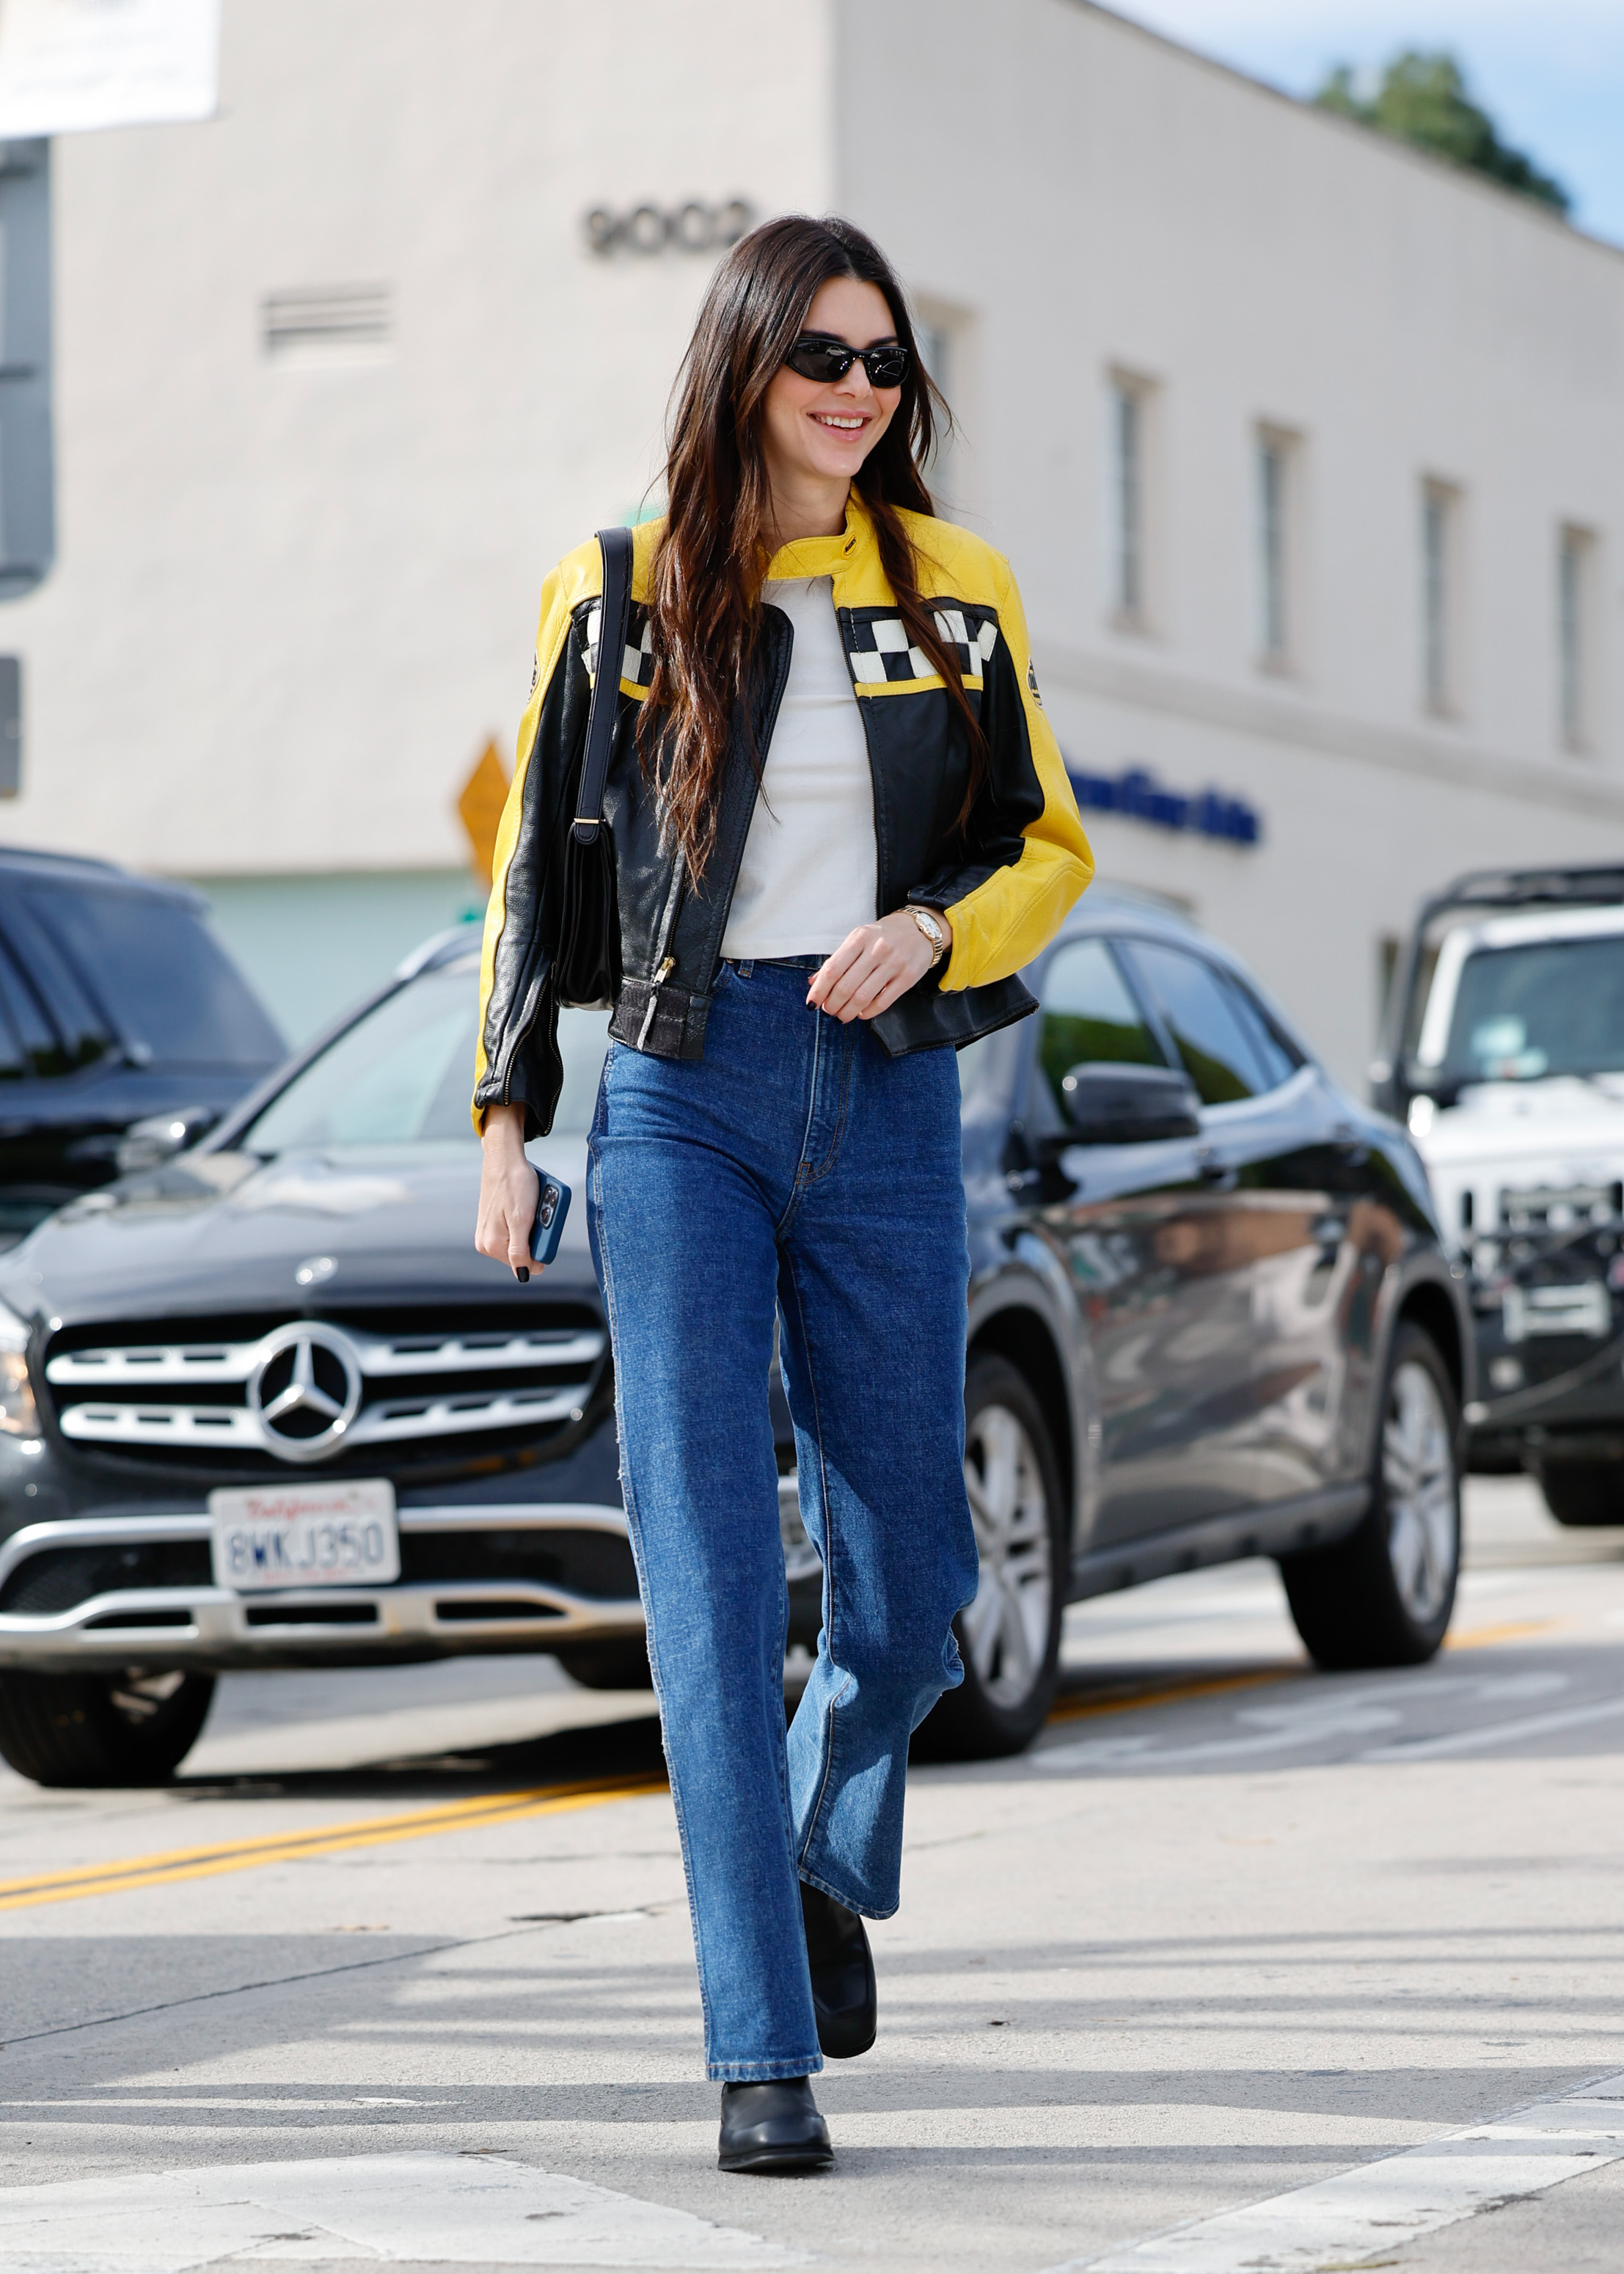 Kendall Jenner Black Leather Straight Fit Jeans Street Style 2019